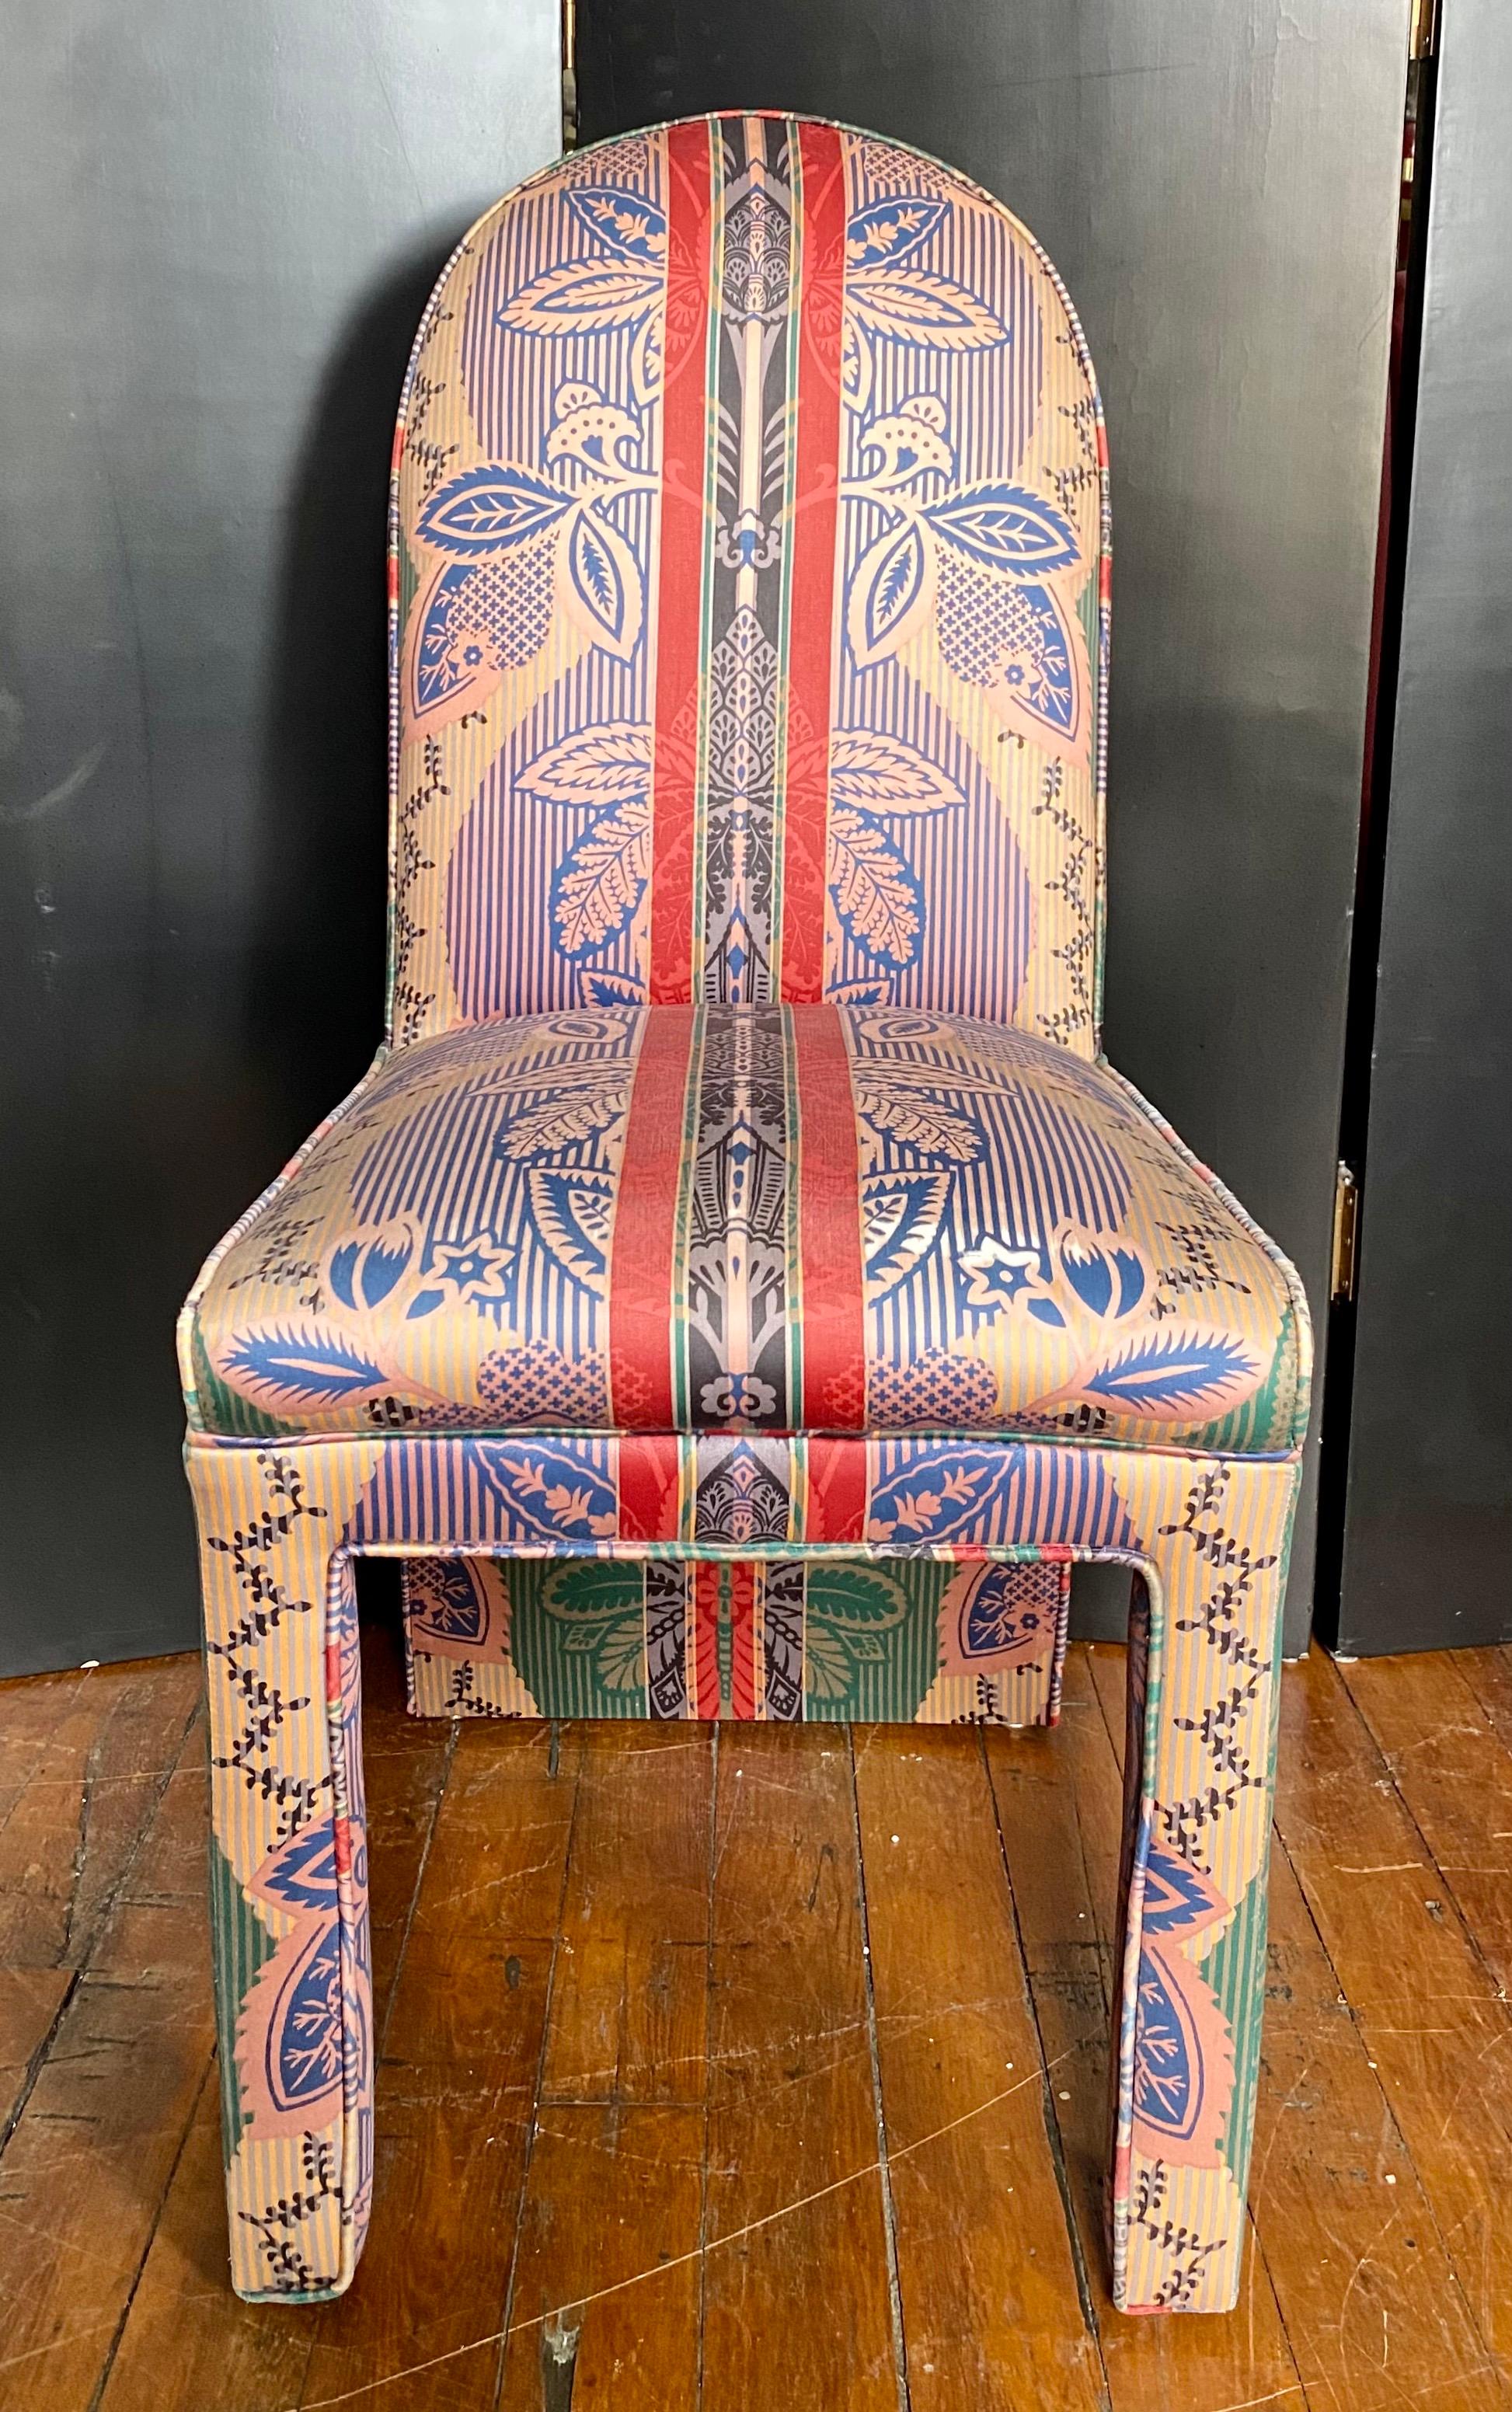 Fabulous set of four sculptural arched parsons dining chairs in a graphic Gucci inspired fabric. These Mid-Century Modern armless dining chairs are fully upholstered in a striking striped damask fabric. 

Measures: Seat Width: 18 Inches.
Seat Depth: